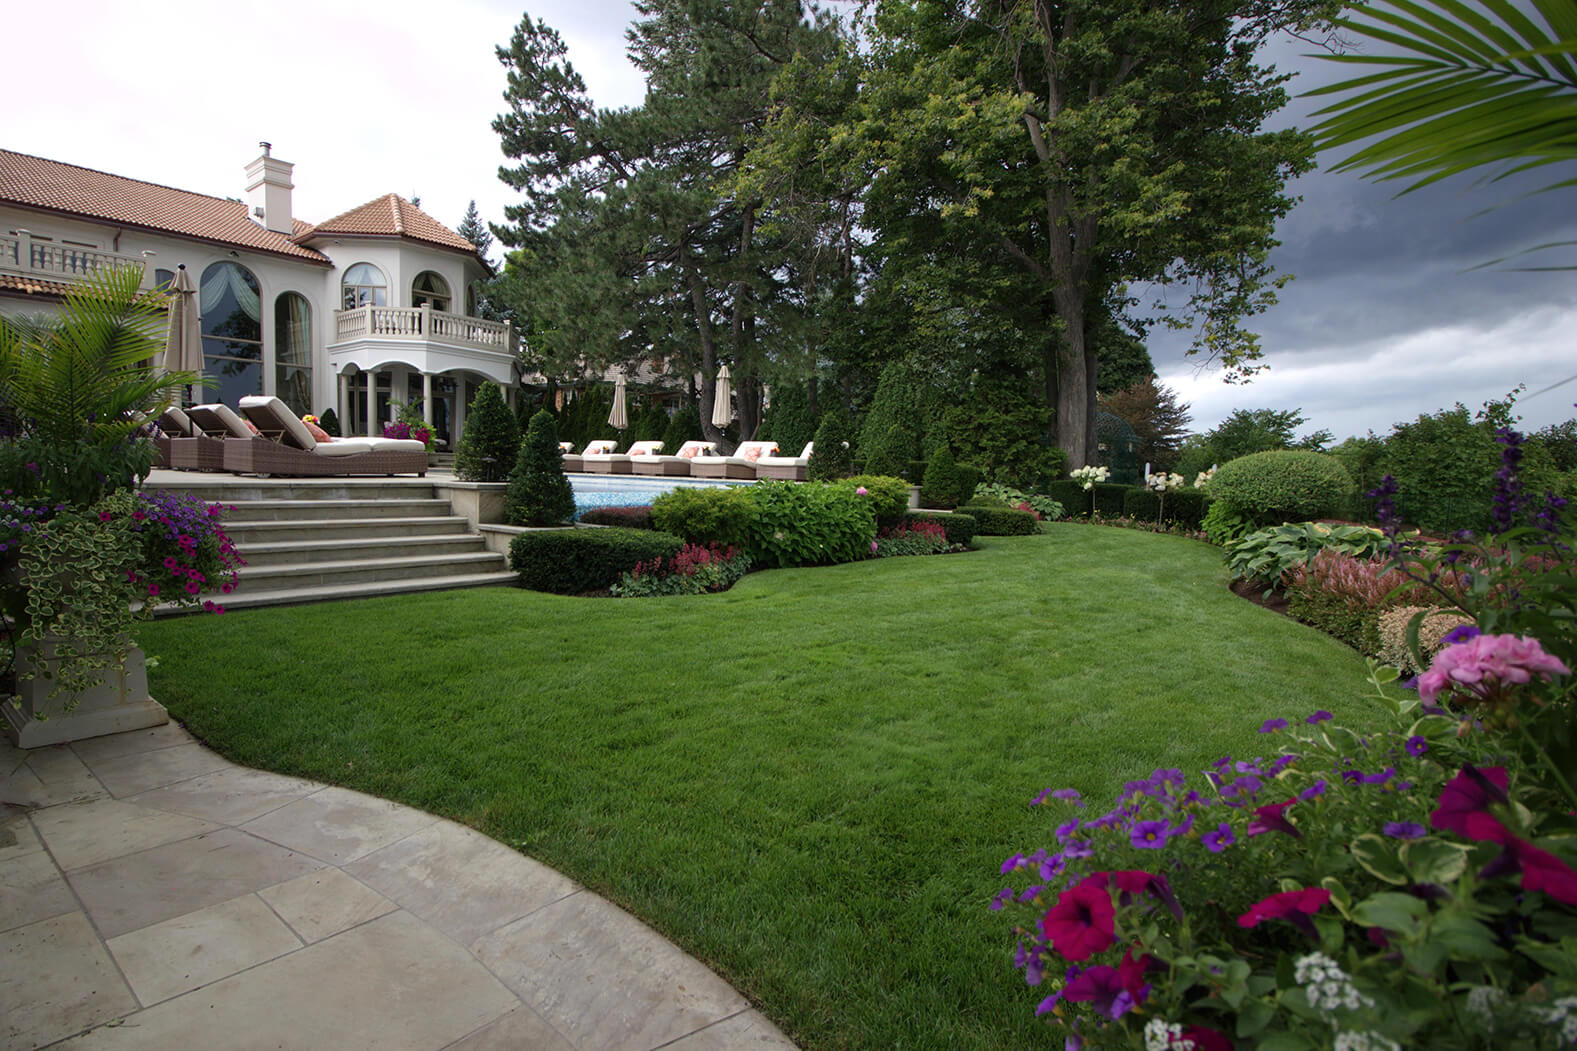 Shades of Summer Landscaping and Maintenance received the National Award of Landscape Excellence for Residential Maintenance.